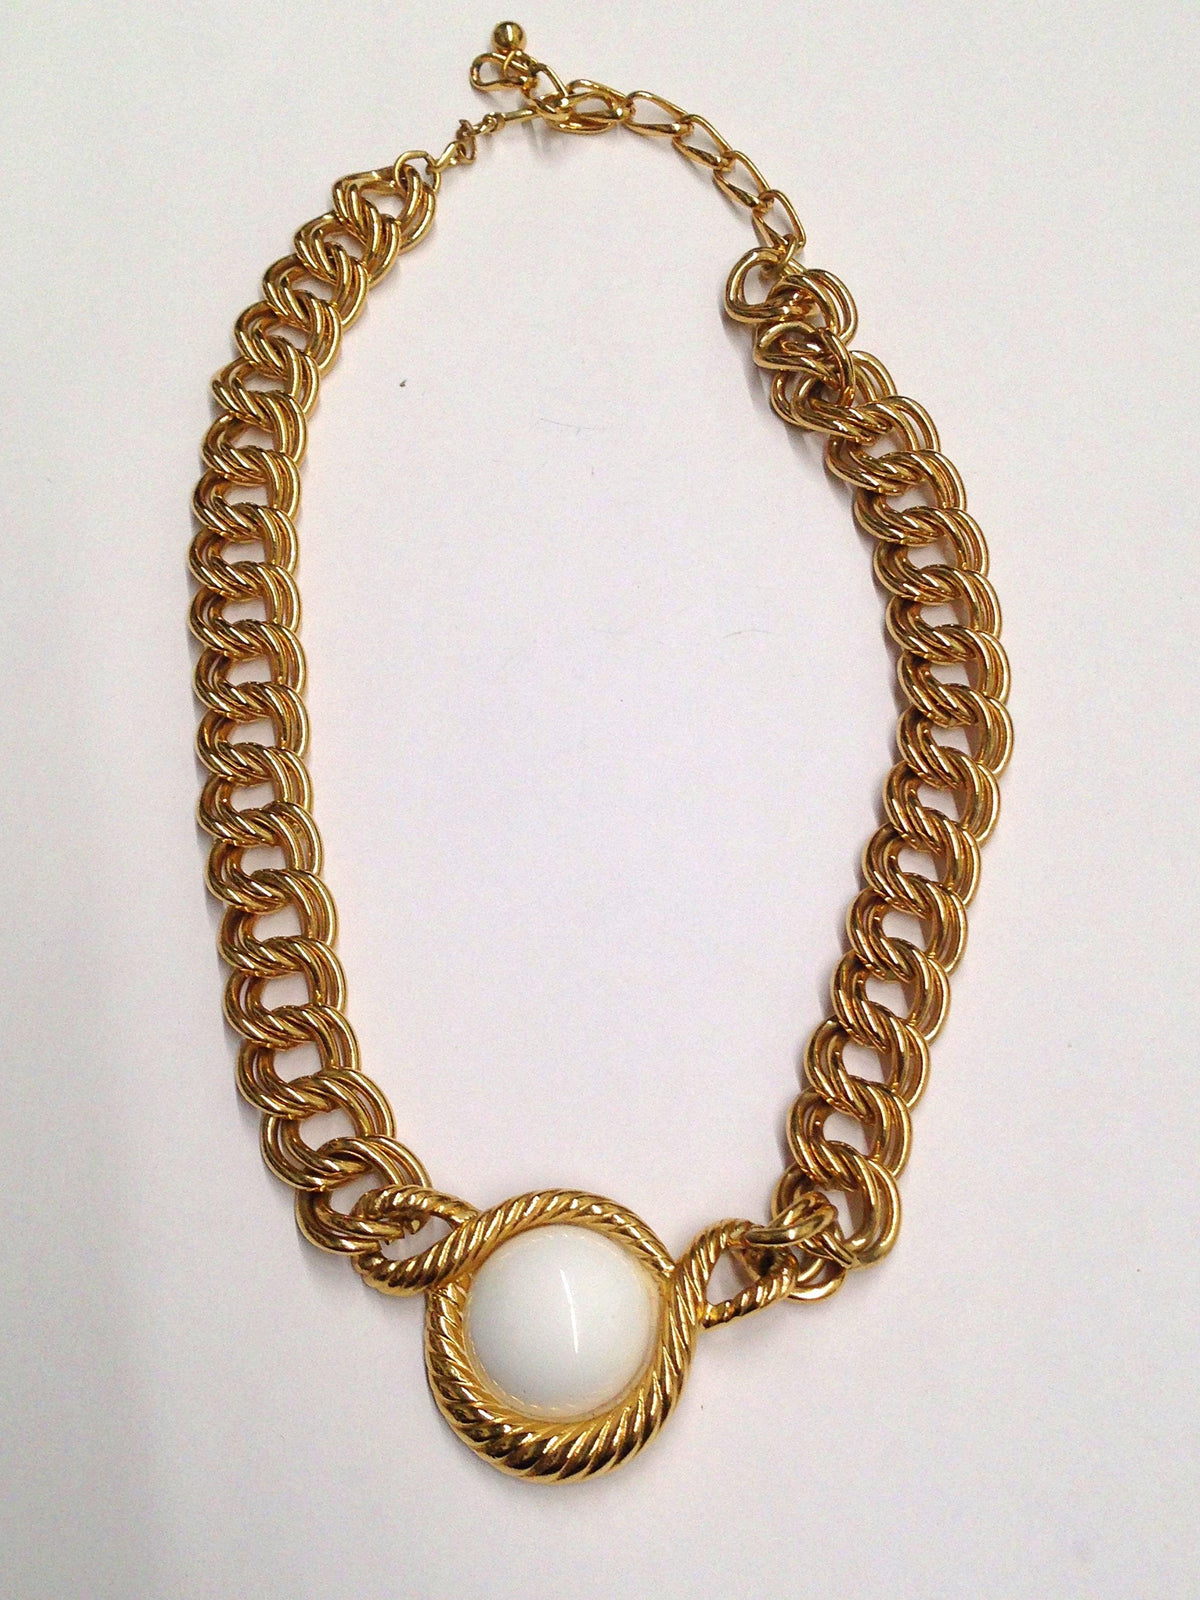 Trifari White Cabochon Gold Chain Necklace - Hers and His Treasures